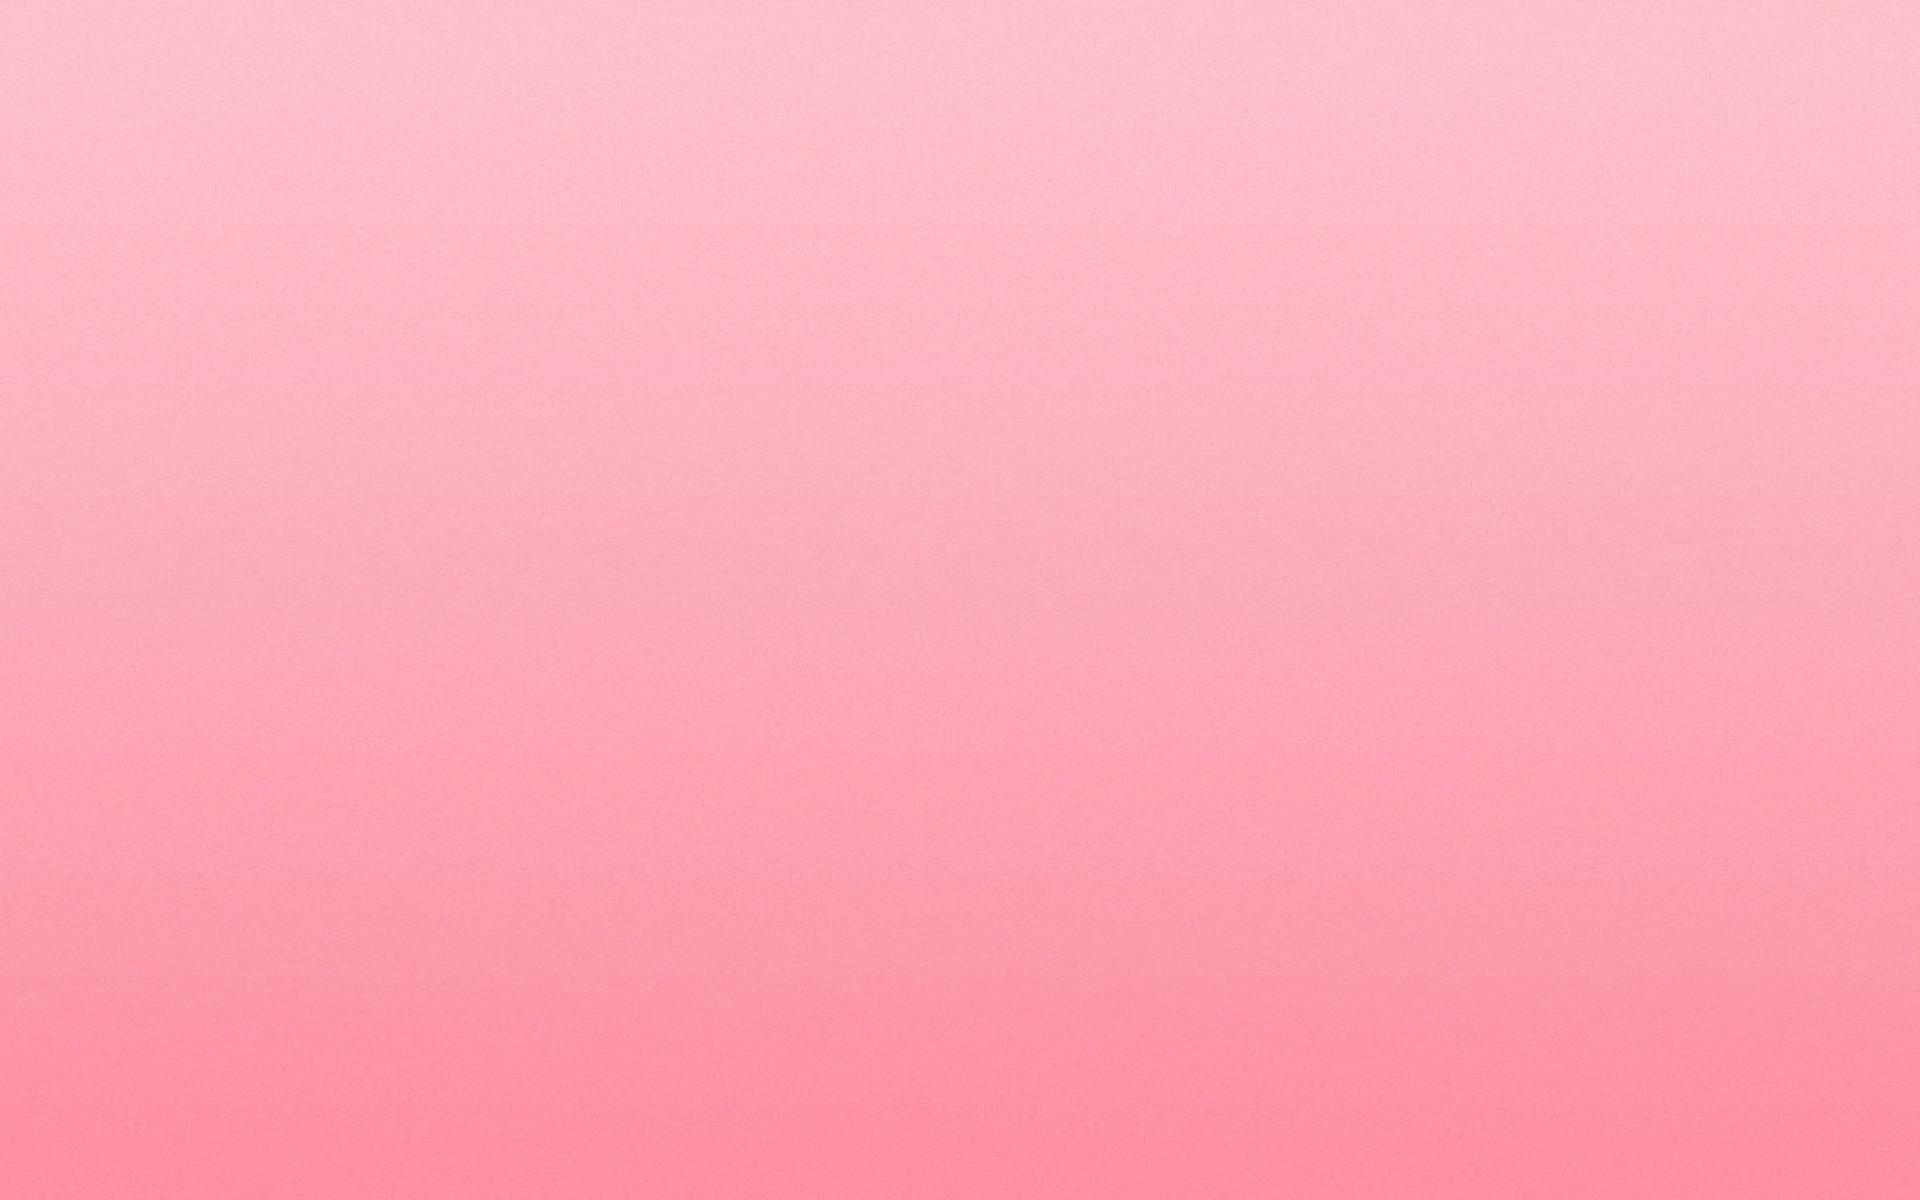 Android Pink Wallpaper Desktop Pc And Mac